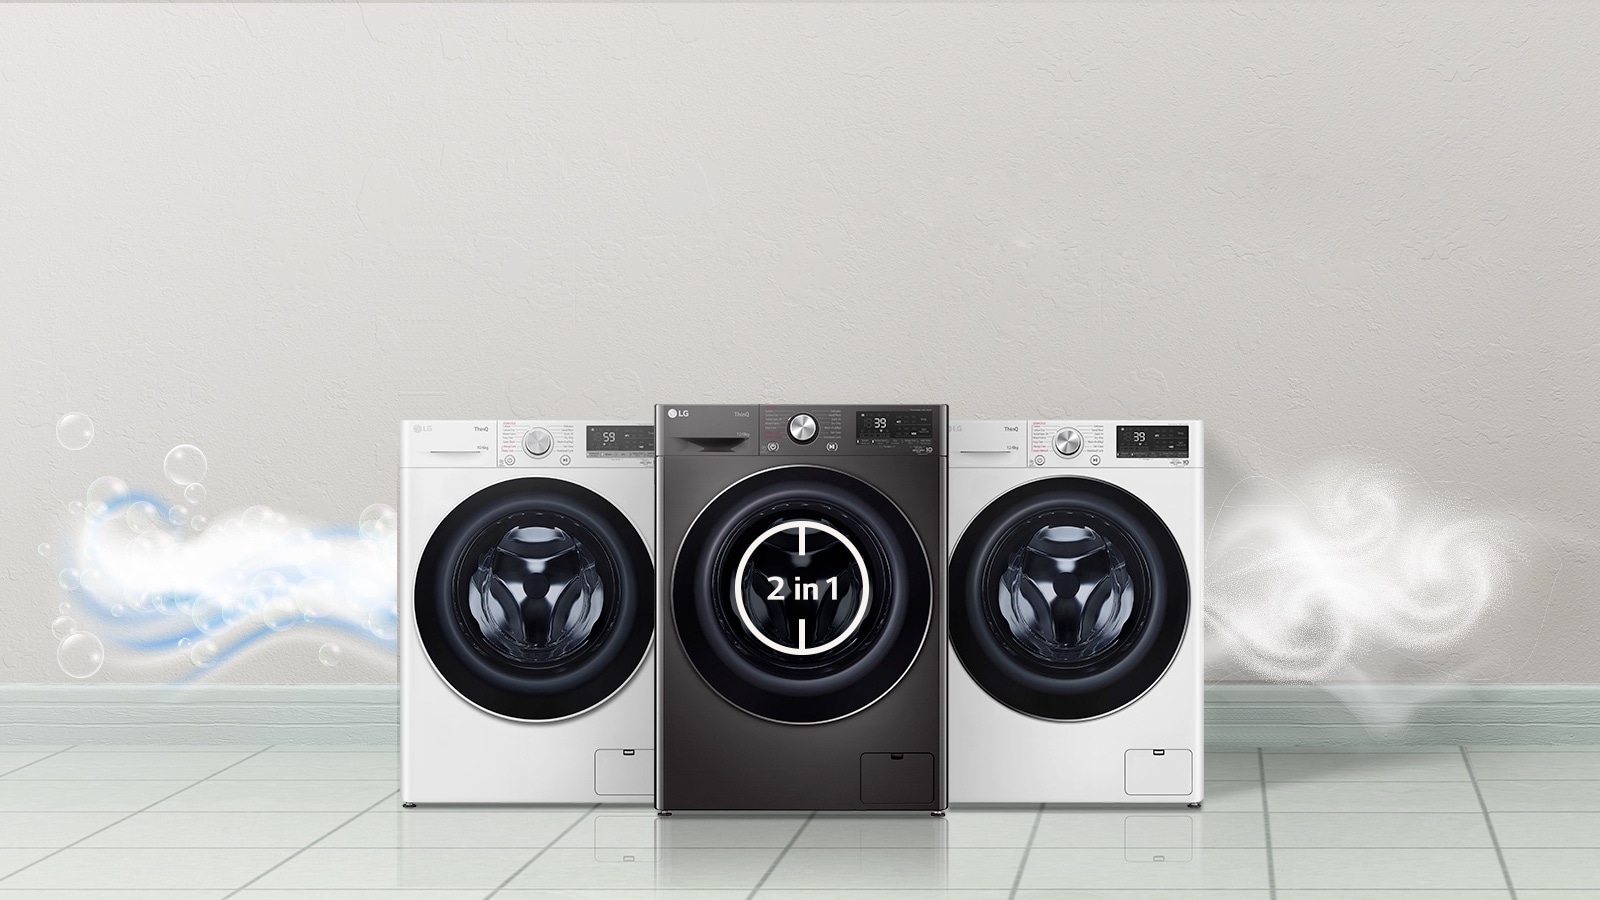 LG WVC5-1409W Washer and Dryer In One